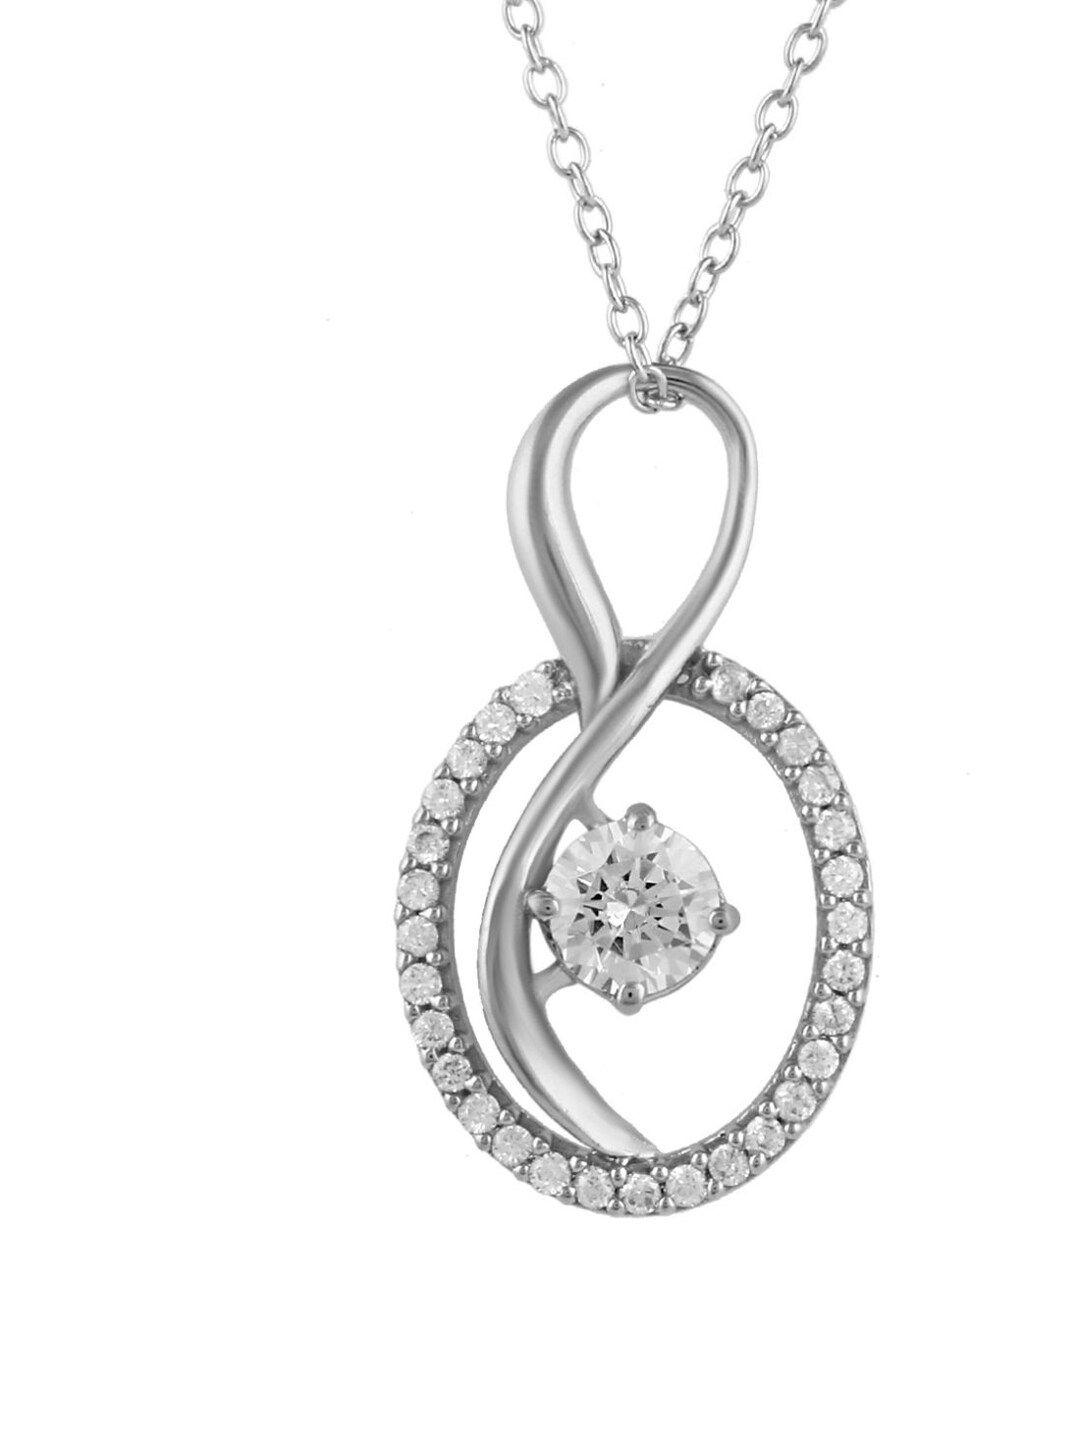 la soula 925 sterling silver rhodium-plated & white cz stone studded pendant with chain